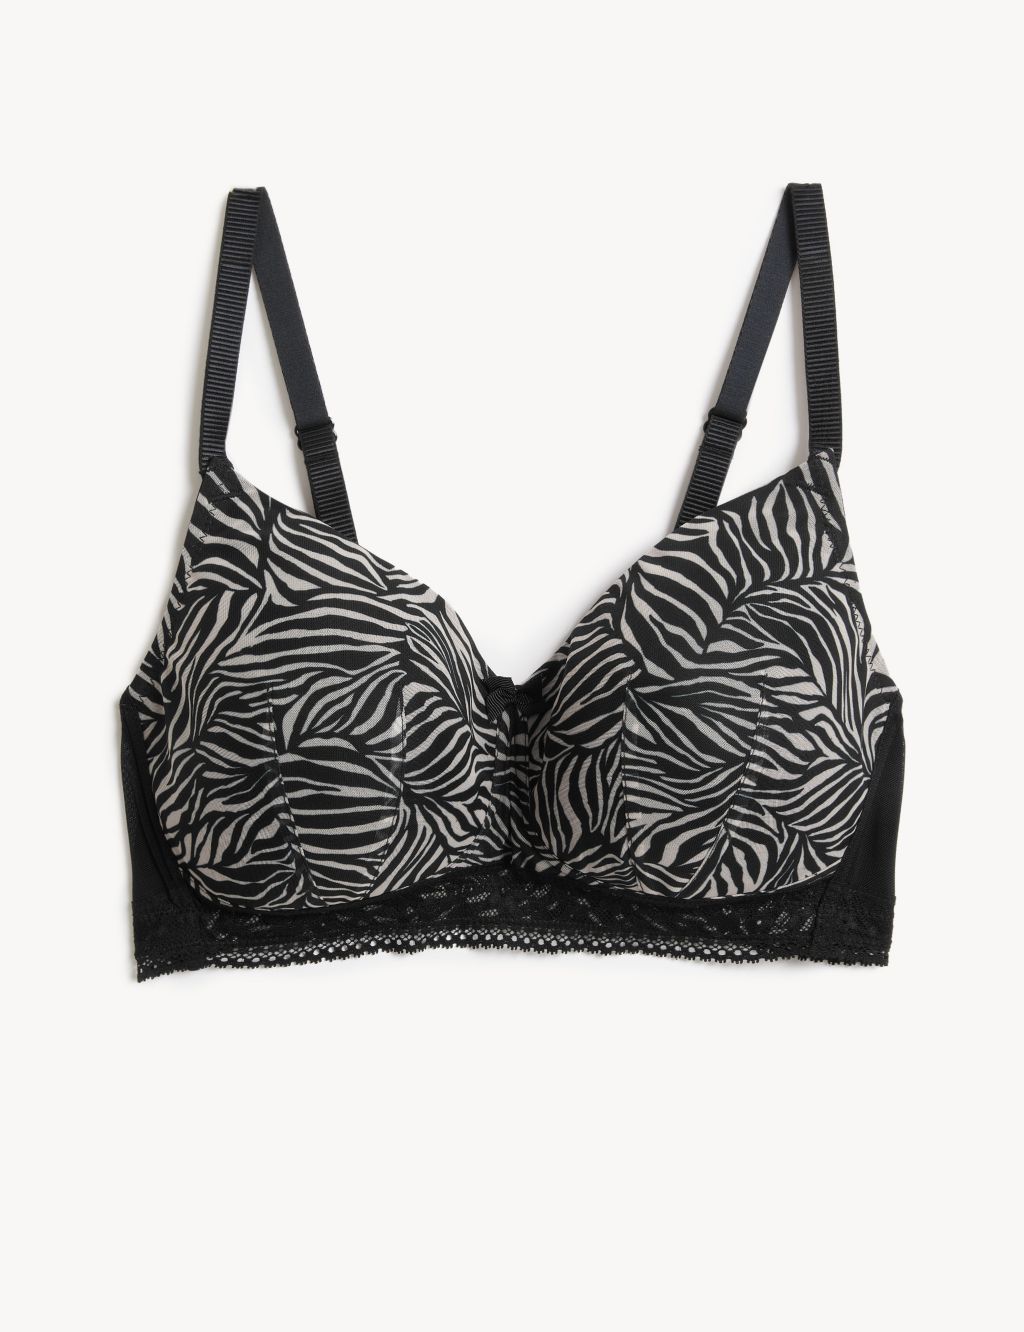 https://asset1.cxnmarksandspencer.com/is/image/mands/Printed-Non-Wired-Post-Surgery-Bra-A-E/SD_02_T33_1802P_Y4_X_EC_90?$PDP_IMAGEGRID$&wid=1024&qlt=80